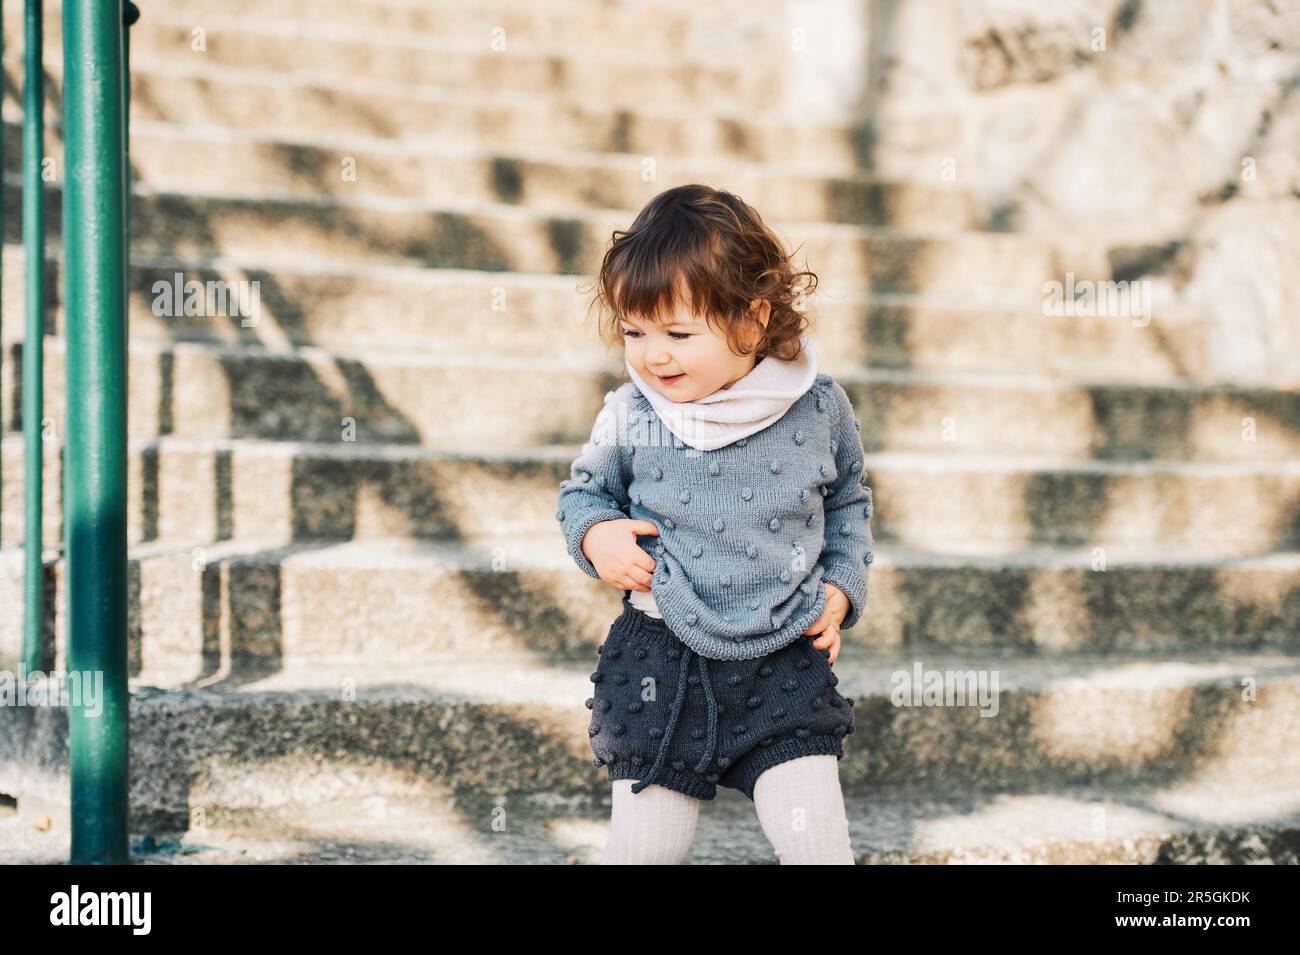 Outdoor portrait of adorable toddler girl walking up the stairs, child of 1 - 2 years old climbing steps on city street, wearing knitted set of pullov Stock Photo